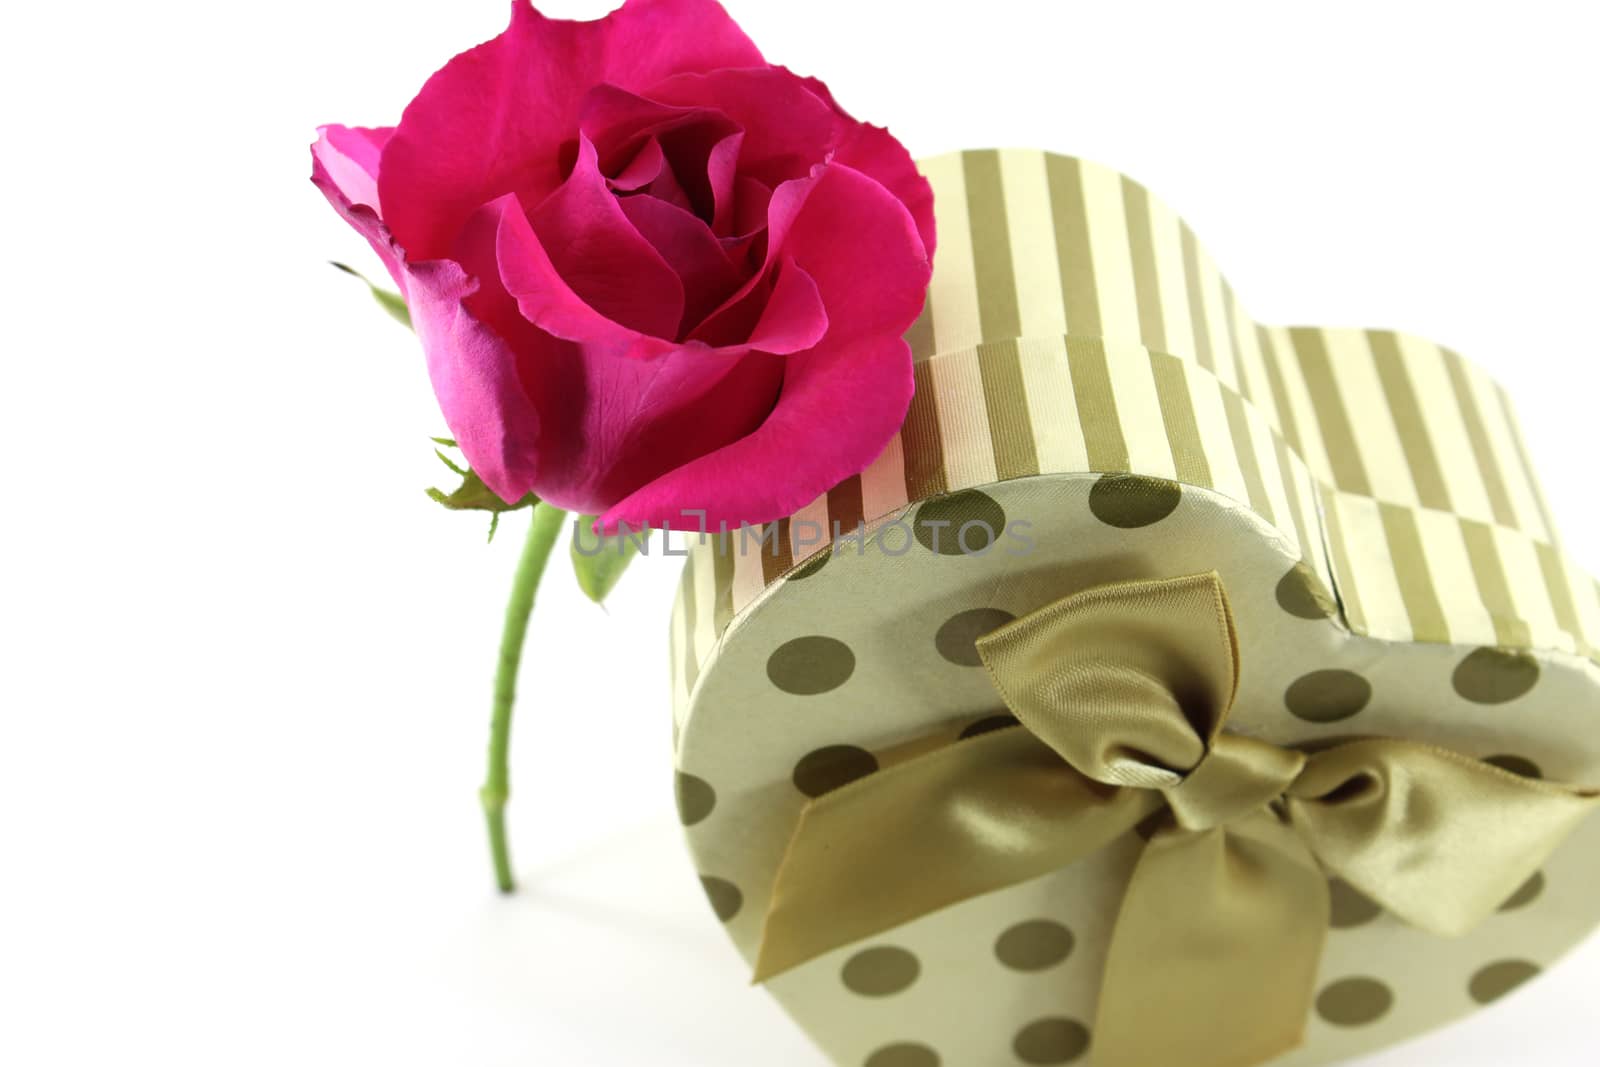 Flower and present gift on isolate background